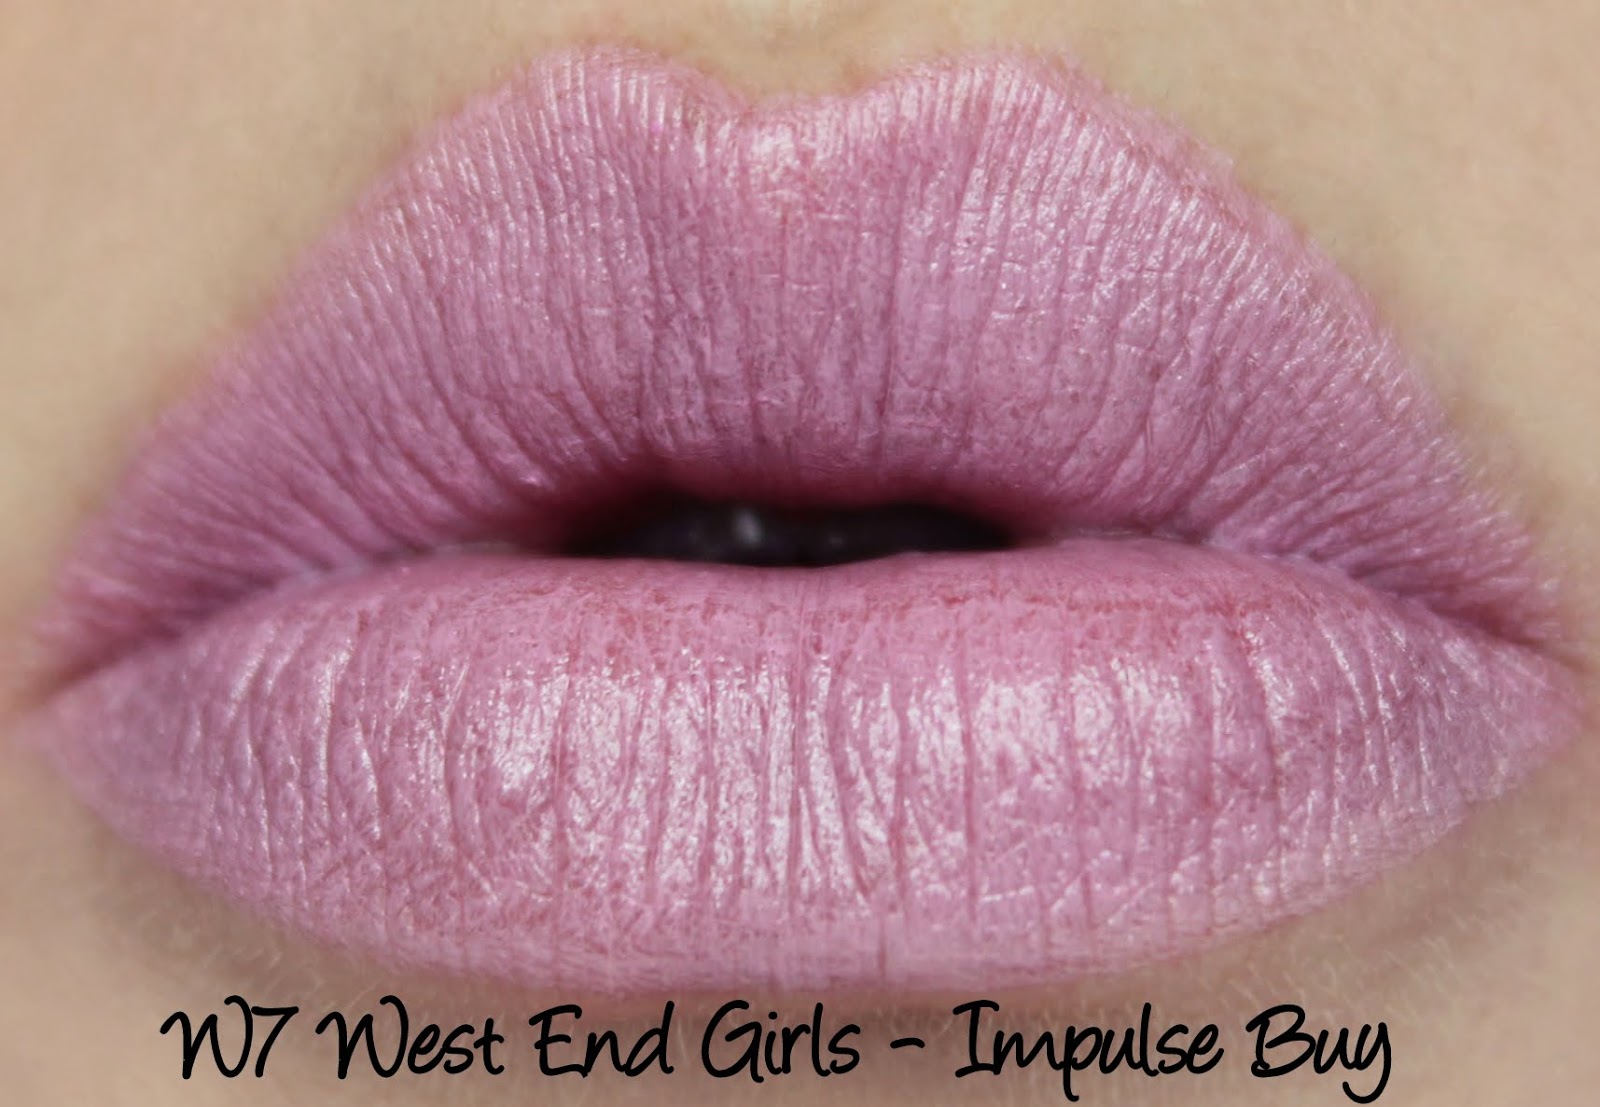 W7 West End Girls Lipstick - Impulse Buy Swatches & Review